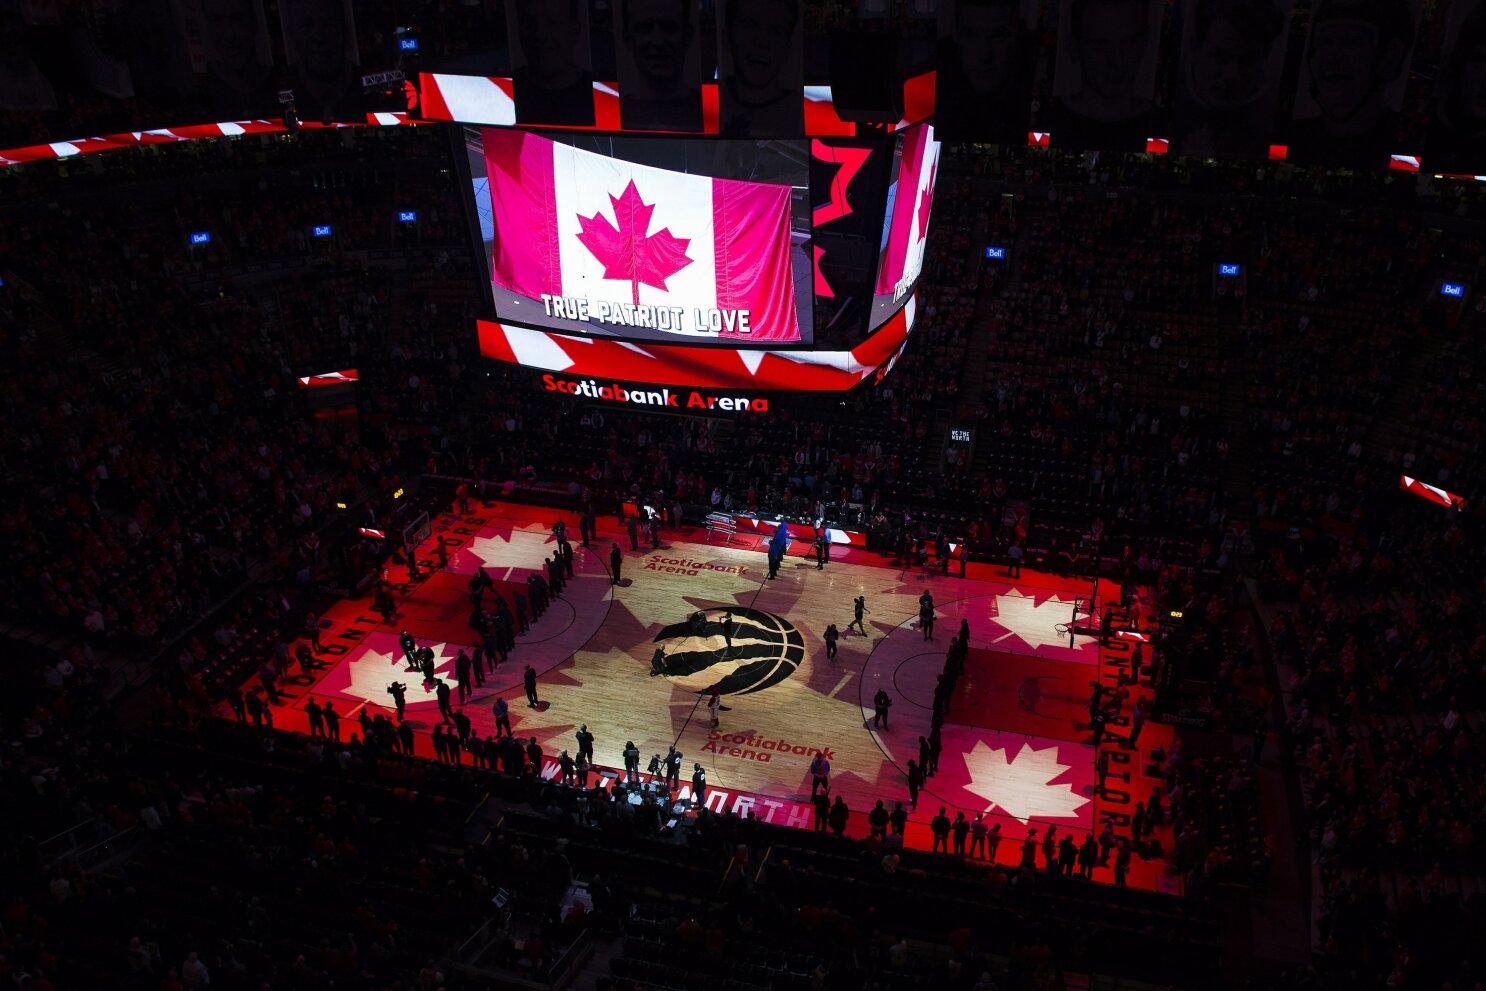 Toronto Raptors announce they will play remainder of home games this season  in Tampa